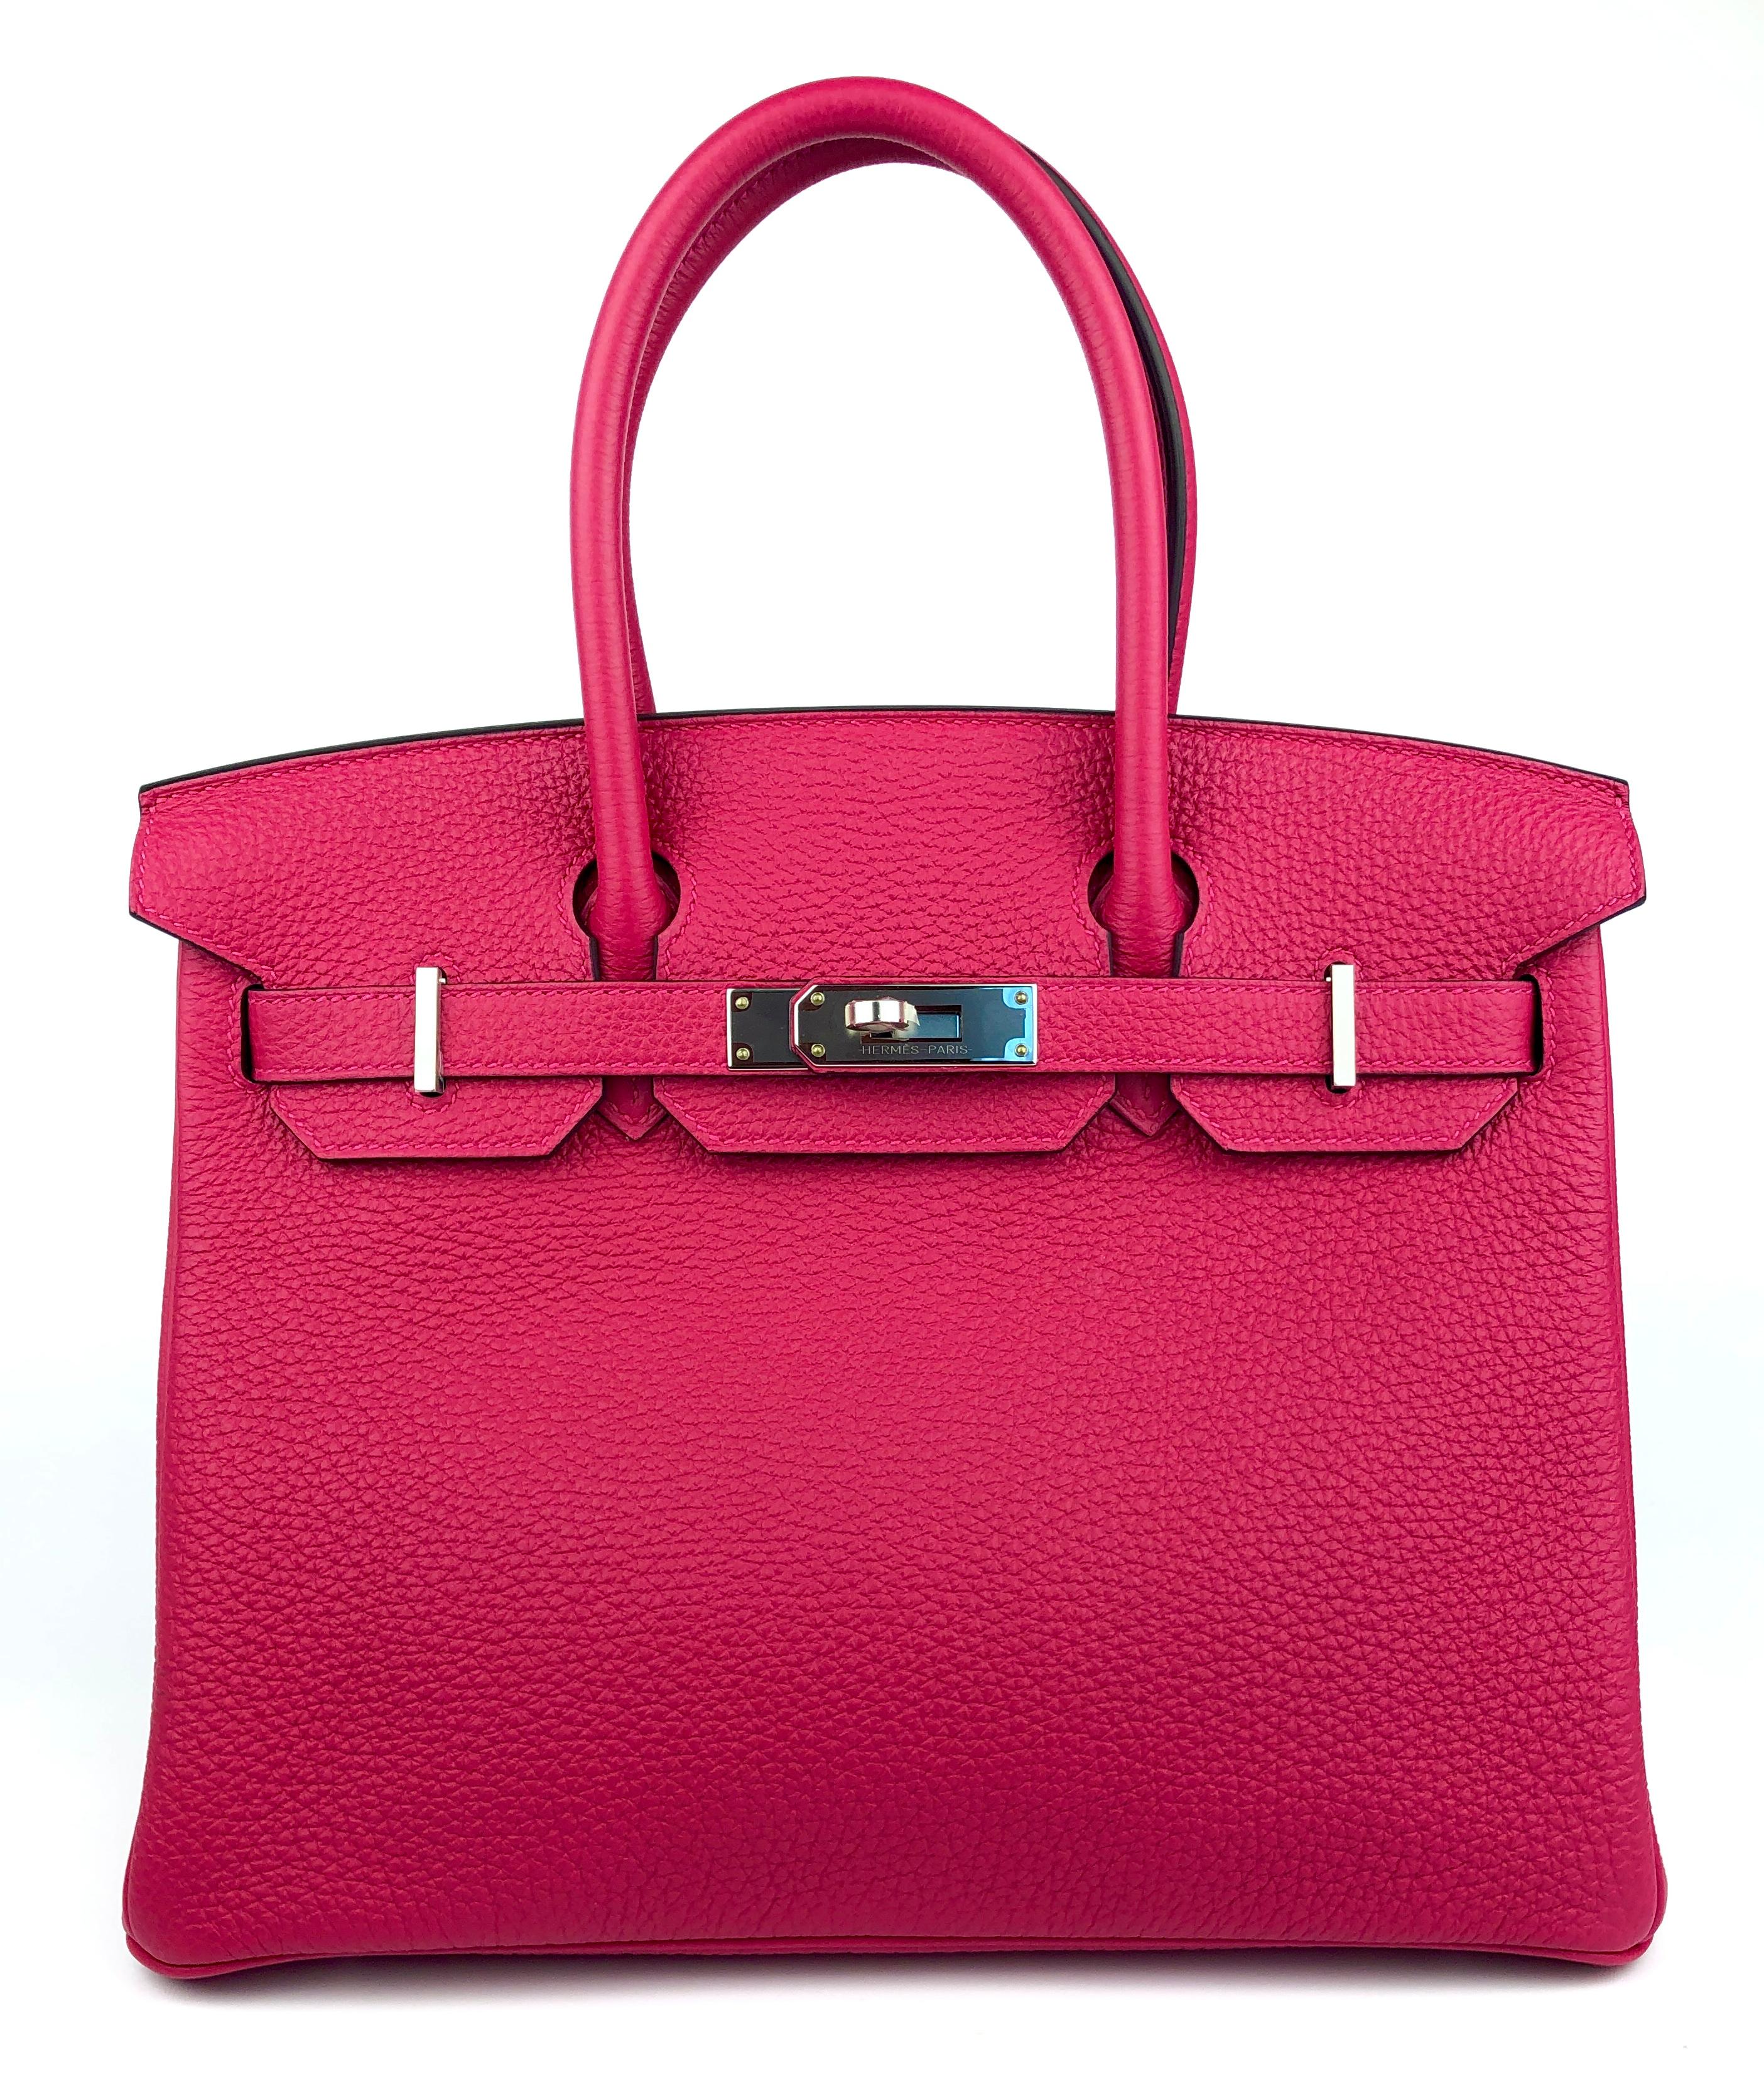 Rare Stunning As New Hermes Birkin 30 Framboise Palladium Hardware. 2021 Z Stamp. 
As New!

Shop with Confidence from Lux Addicts. Authenticity Guaranteed! 